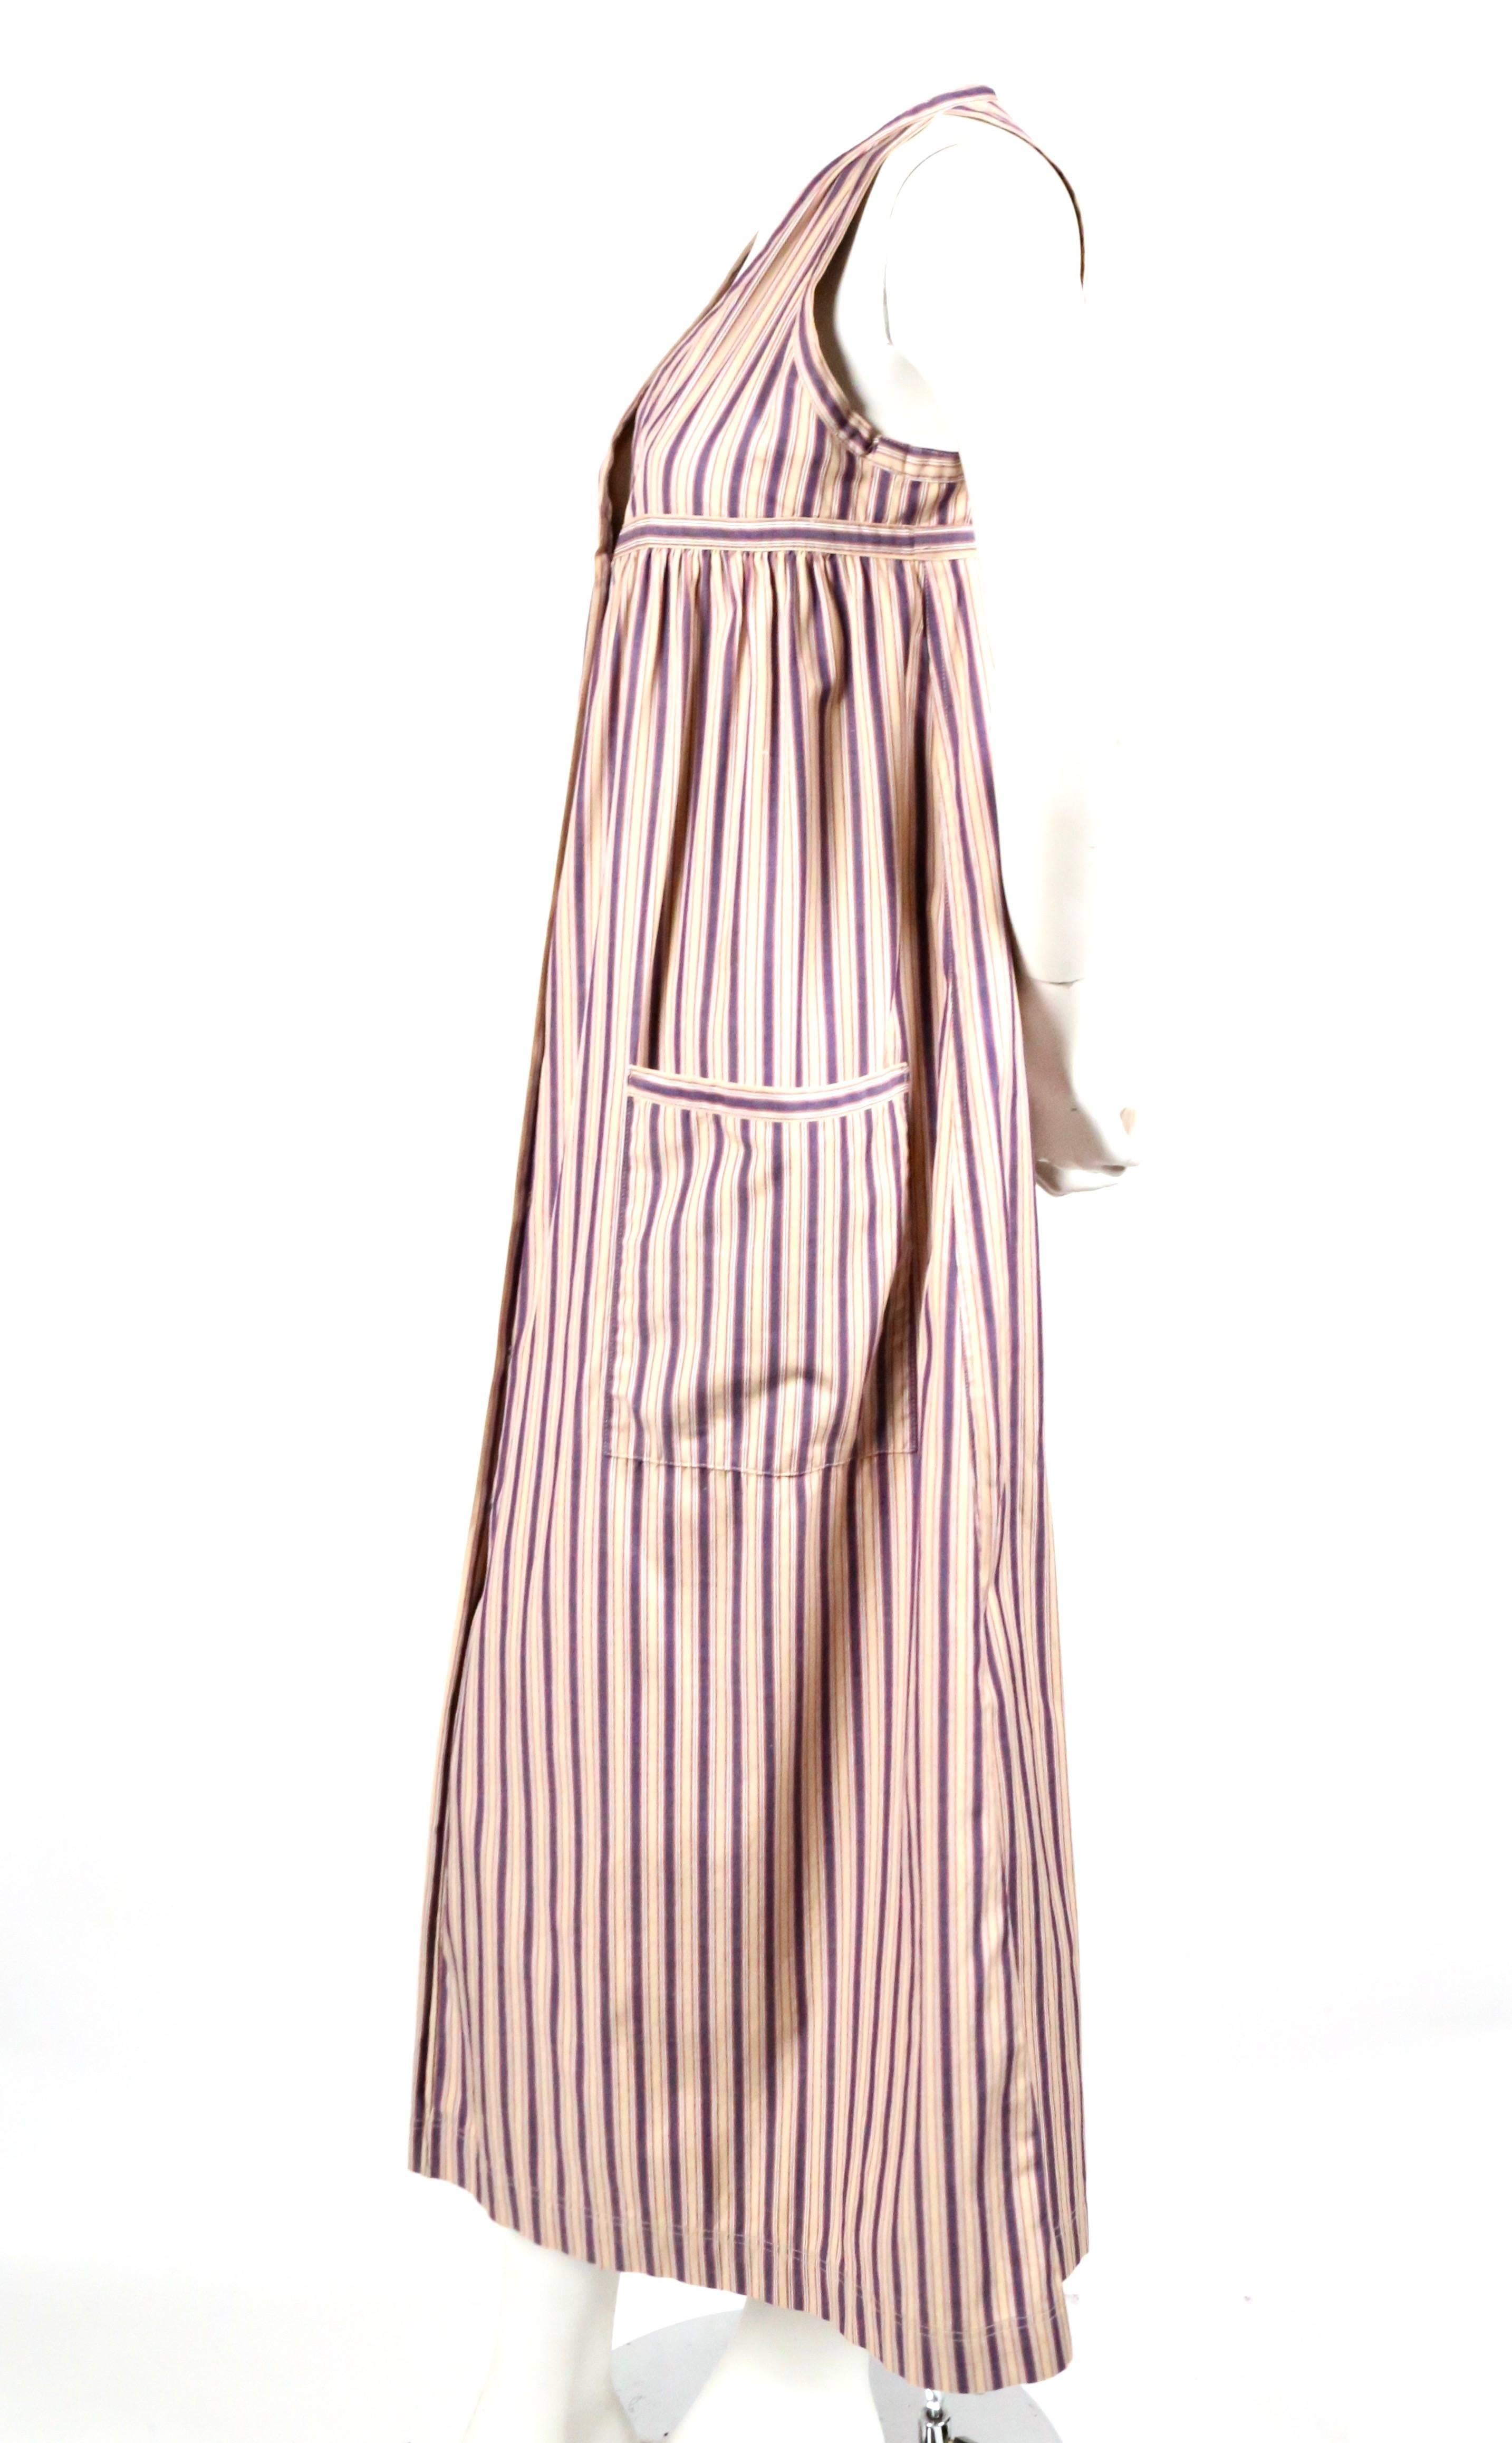 Striped cotton dress with patch pockets designed by Yves Saint Laurent dating to the 1970's. Labeled a French size 34 however the dress has been altered underarms so it best fits a US 2-4. Approximate measurements: bust 34